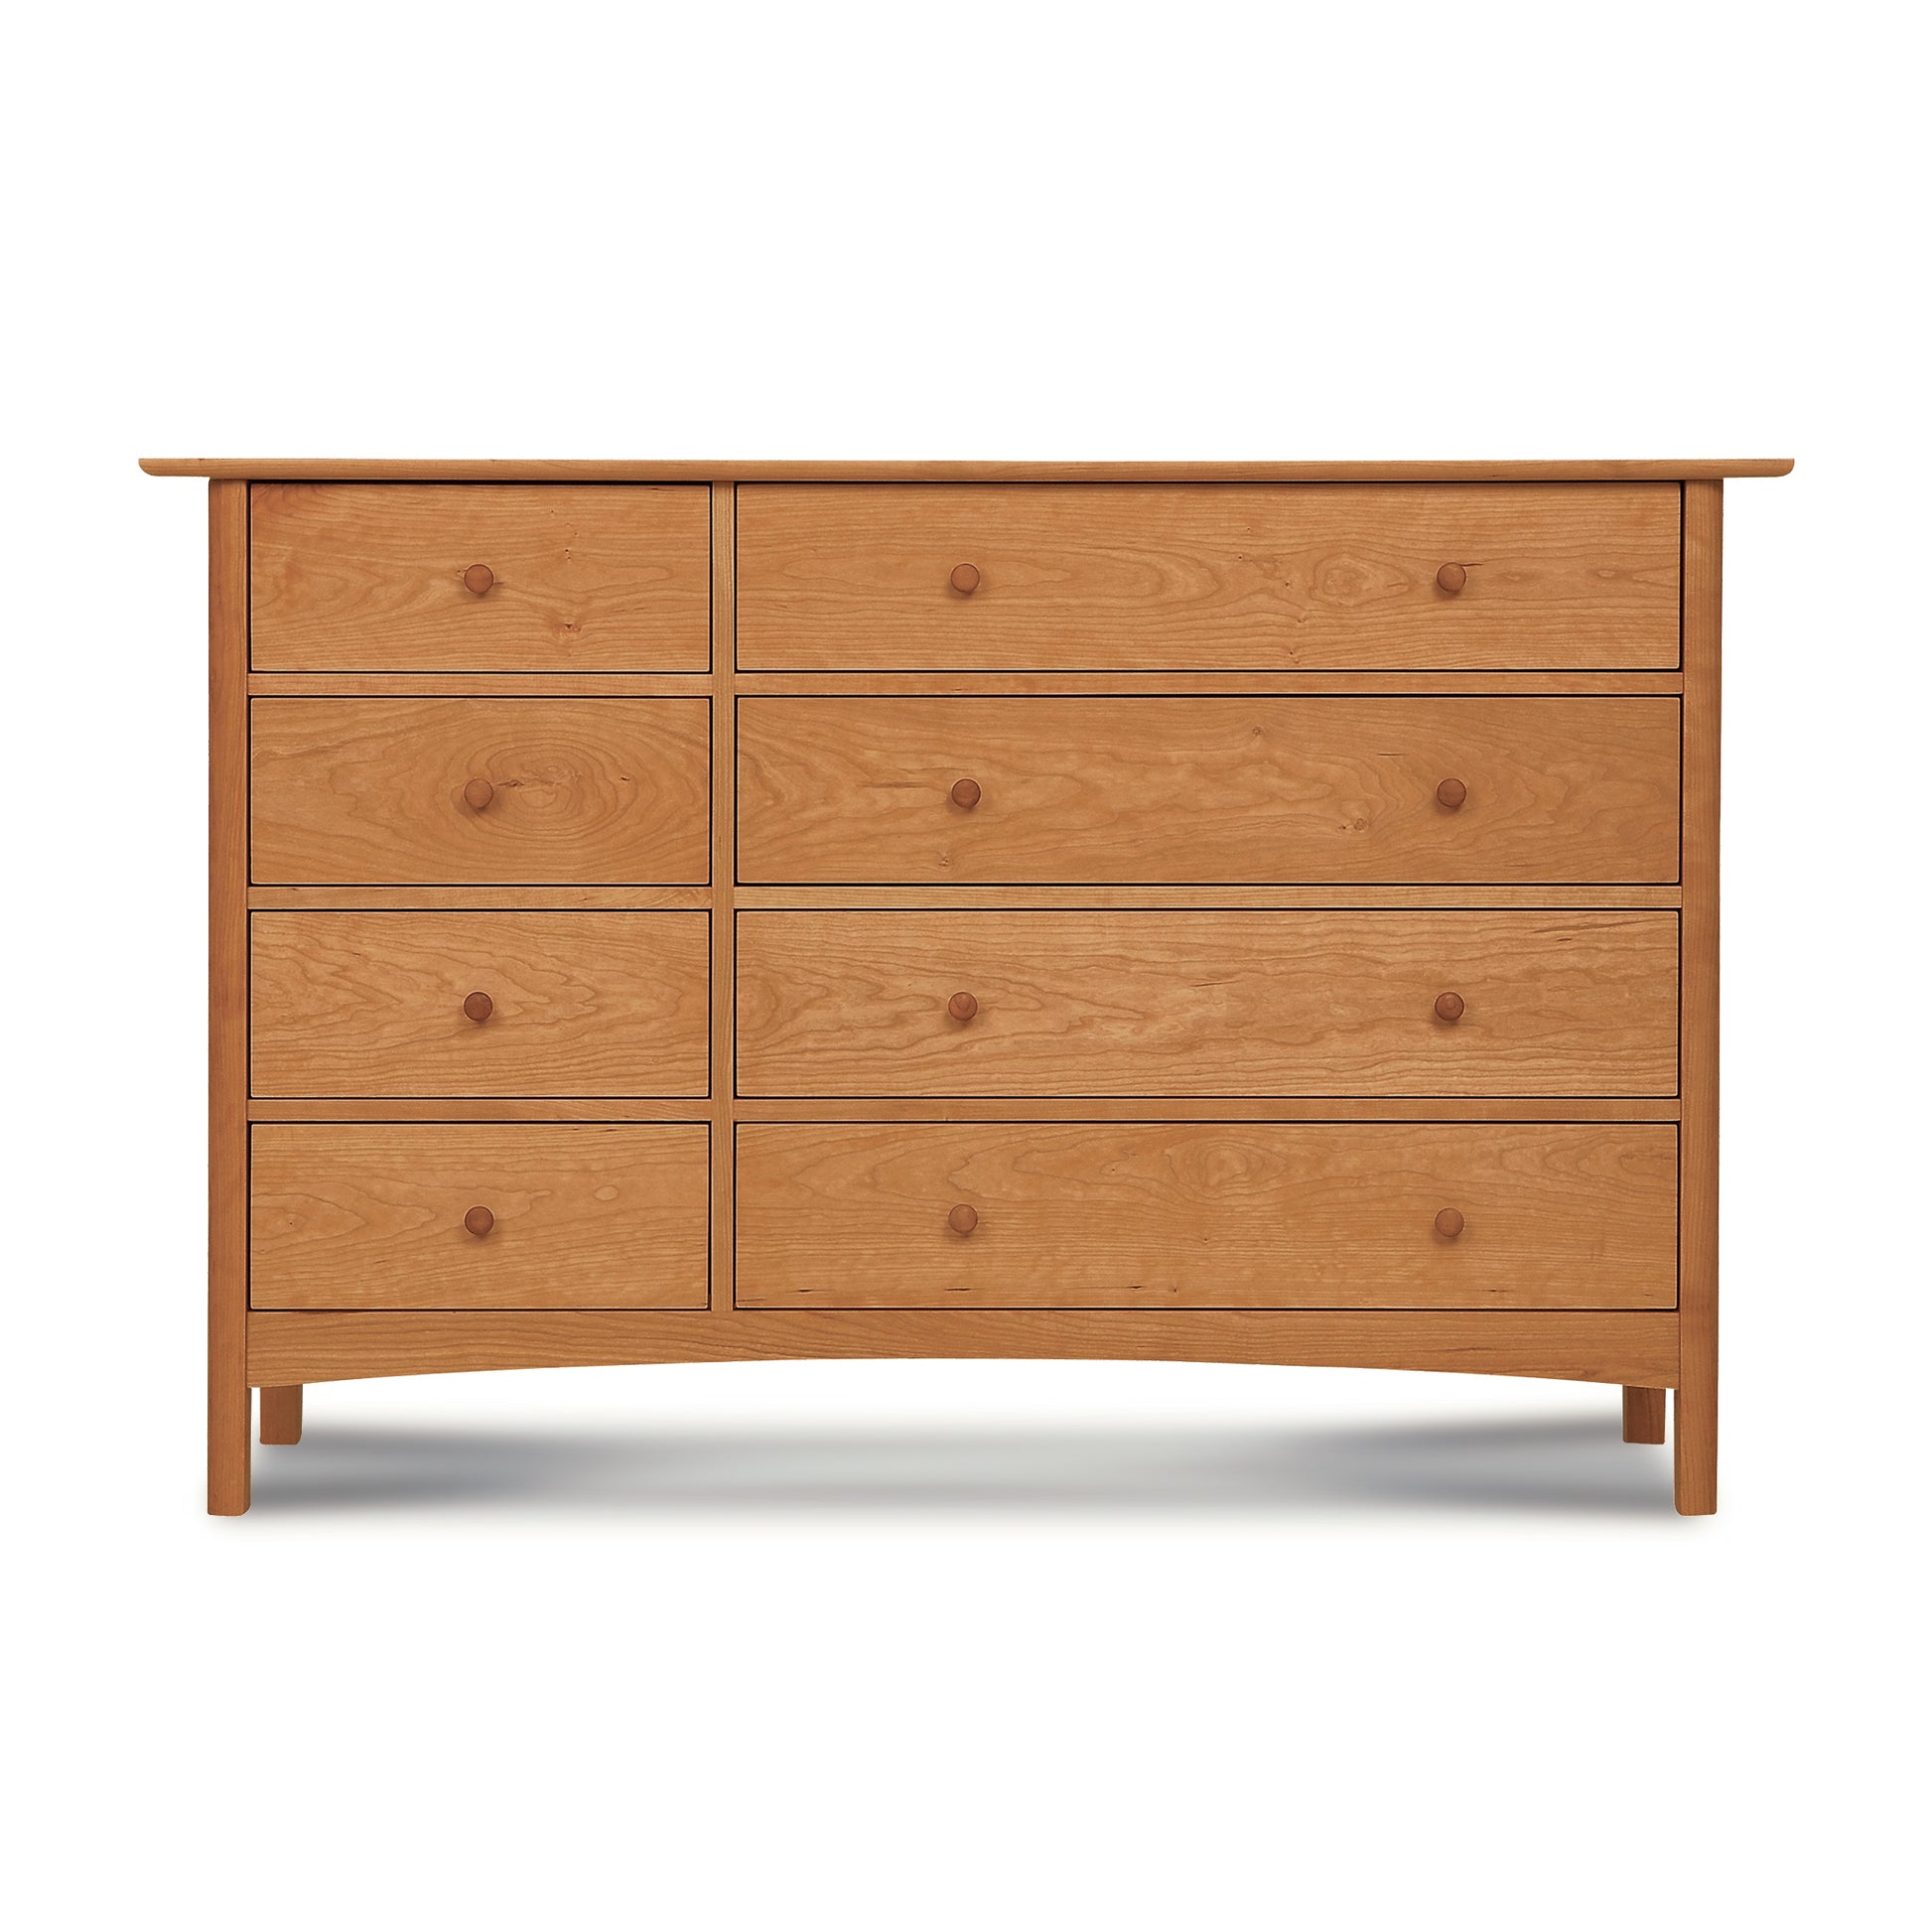 A Heartwood Shaker 8-Drawer Dresser #2 by Vermont Furniture Designs on a white background.